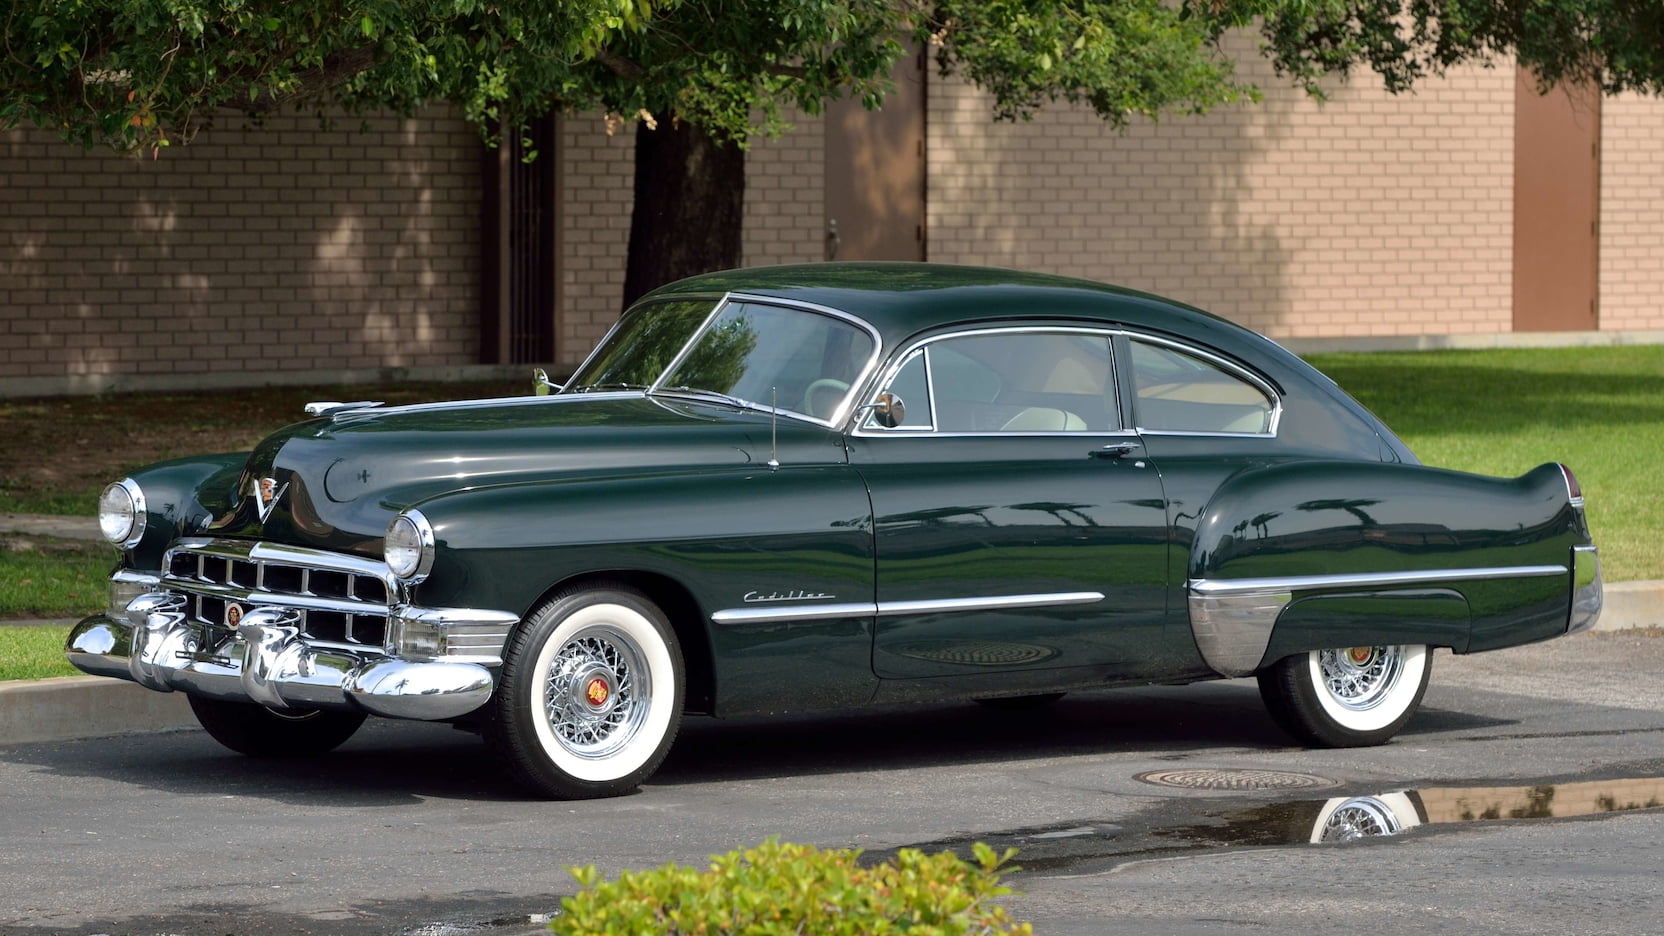 Cadillac 61 Coupe Wallpapers